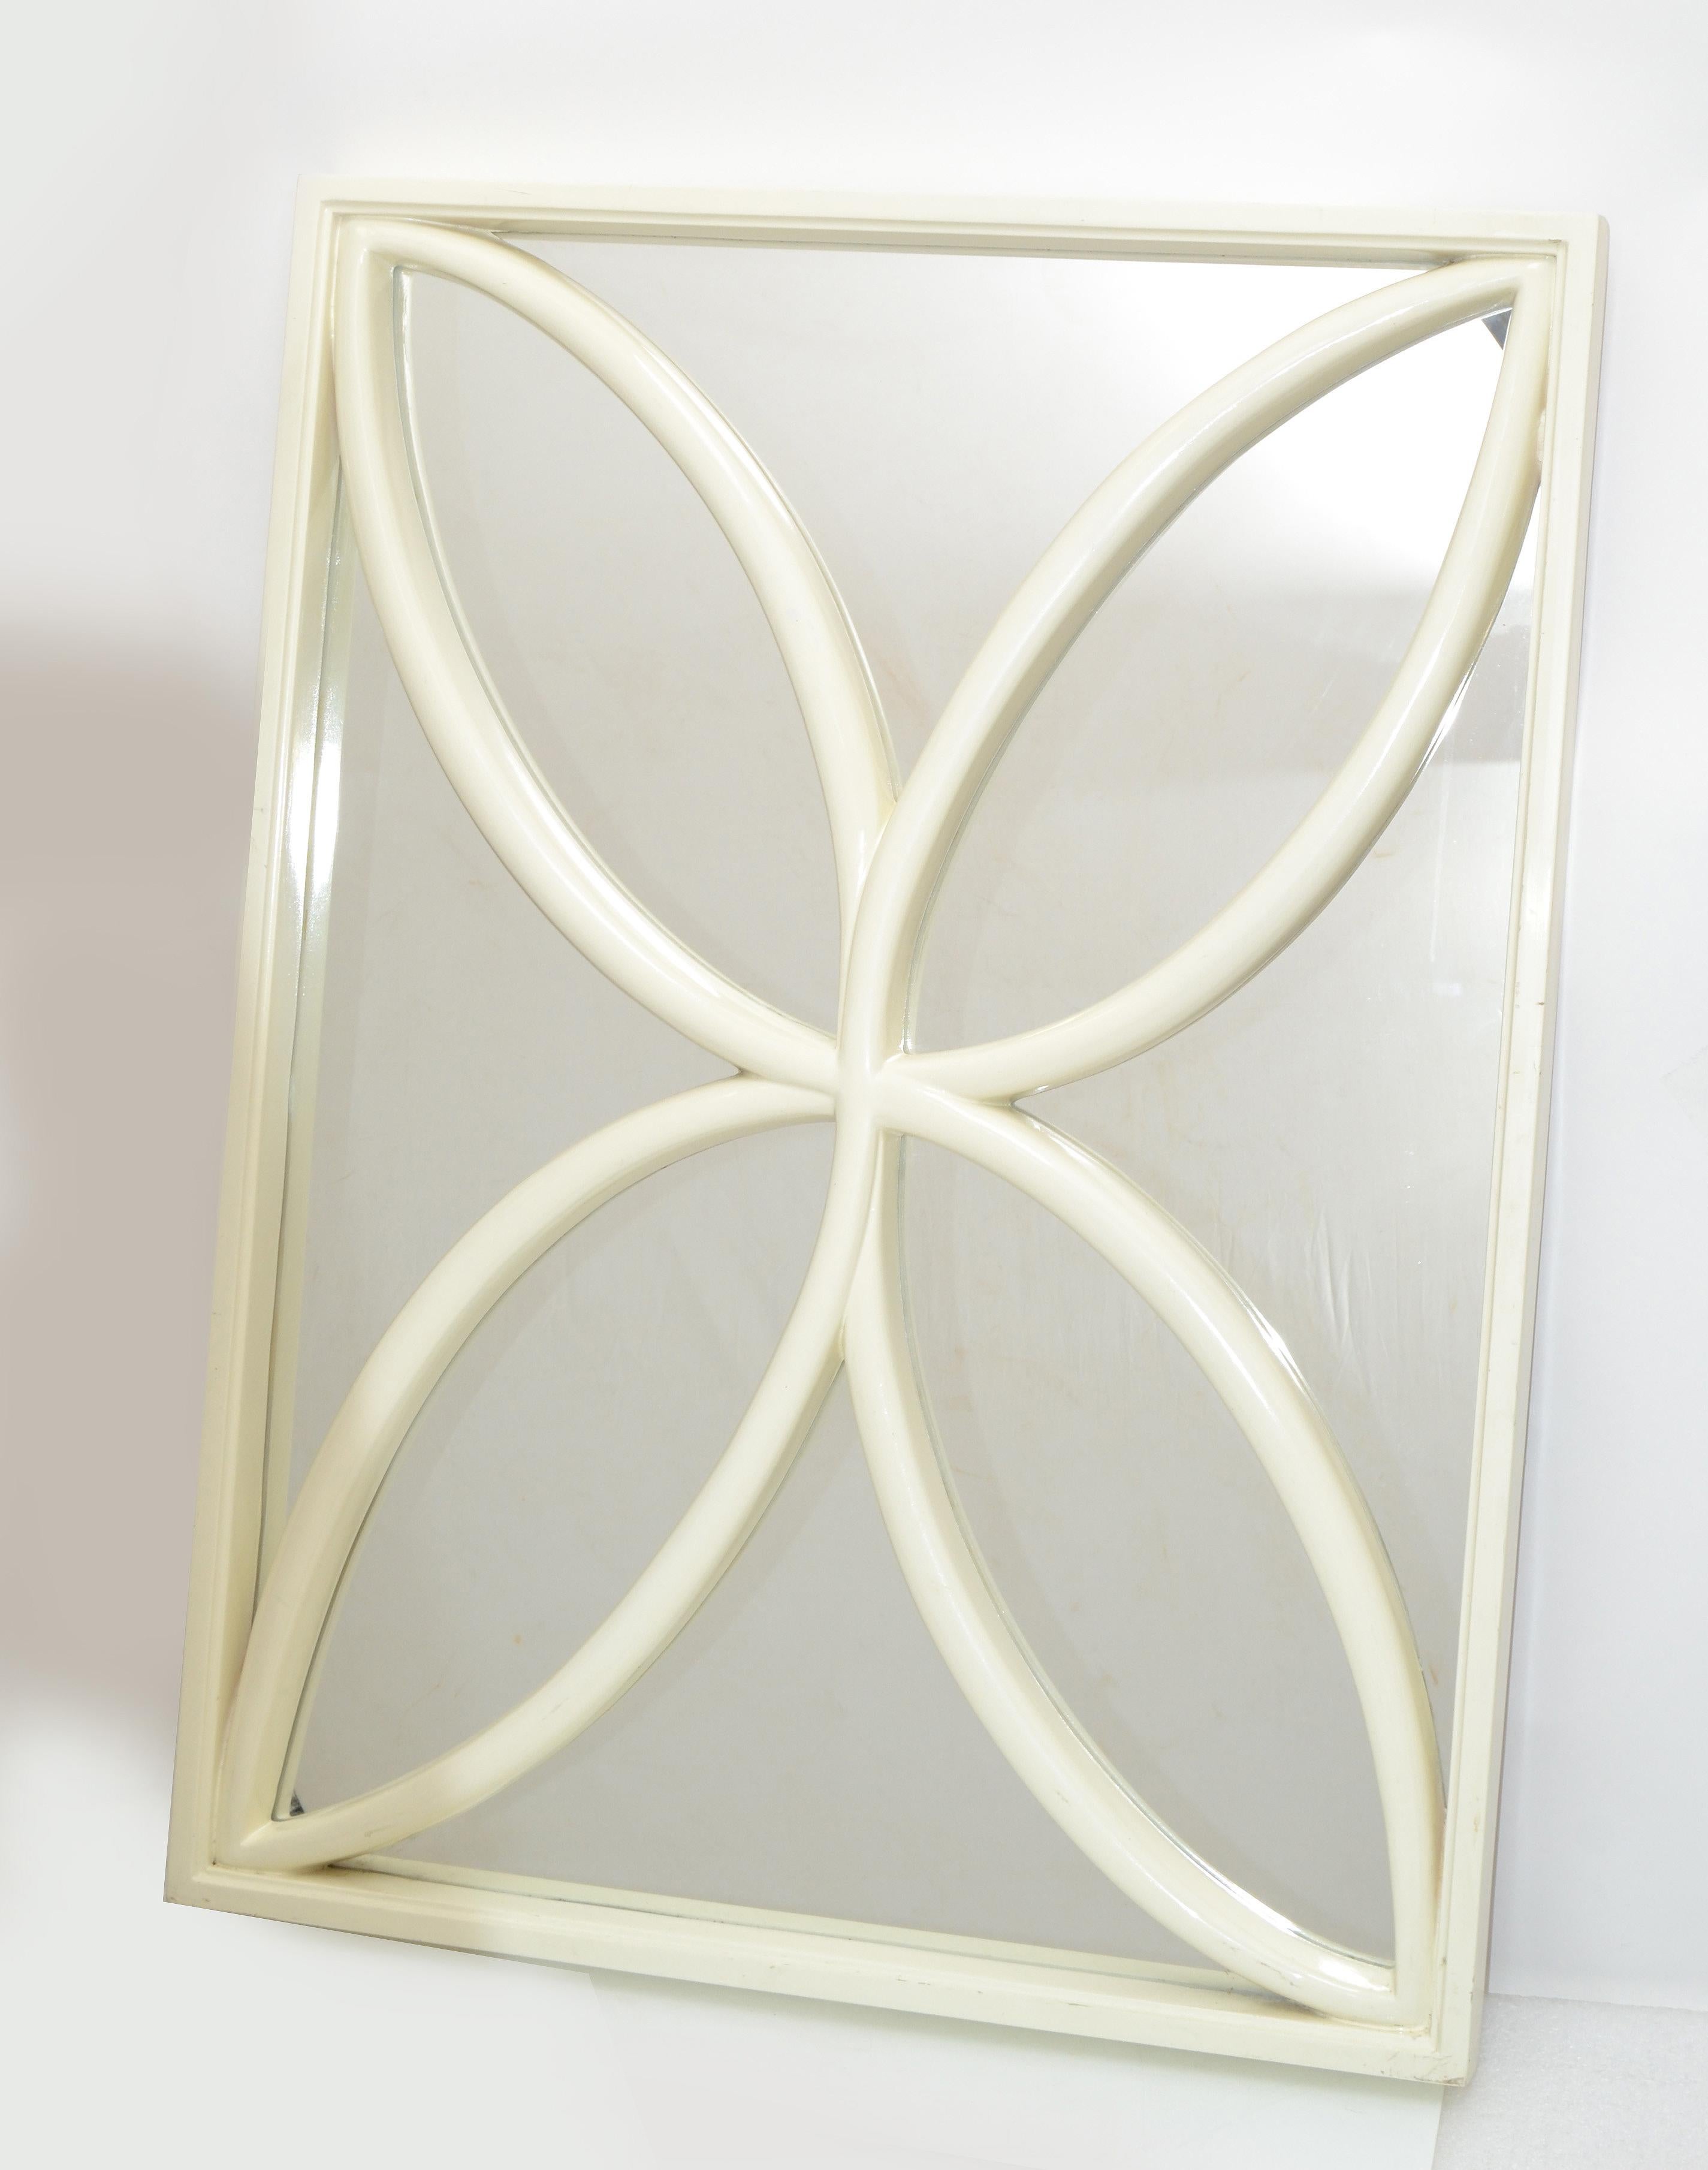 1970s Hollywood Regency Faux-Bois antique white hand carved wood wall mirror in the style of Gampel-Stoll.
Heavy Butterfly style shaped with glossy finish.
It can be securely hung horizontal as well as vertical.
In original good vintage